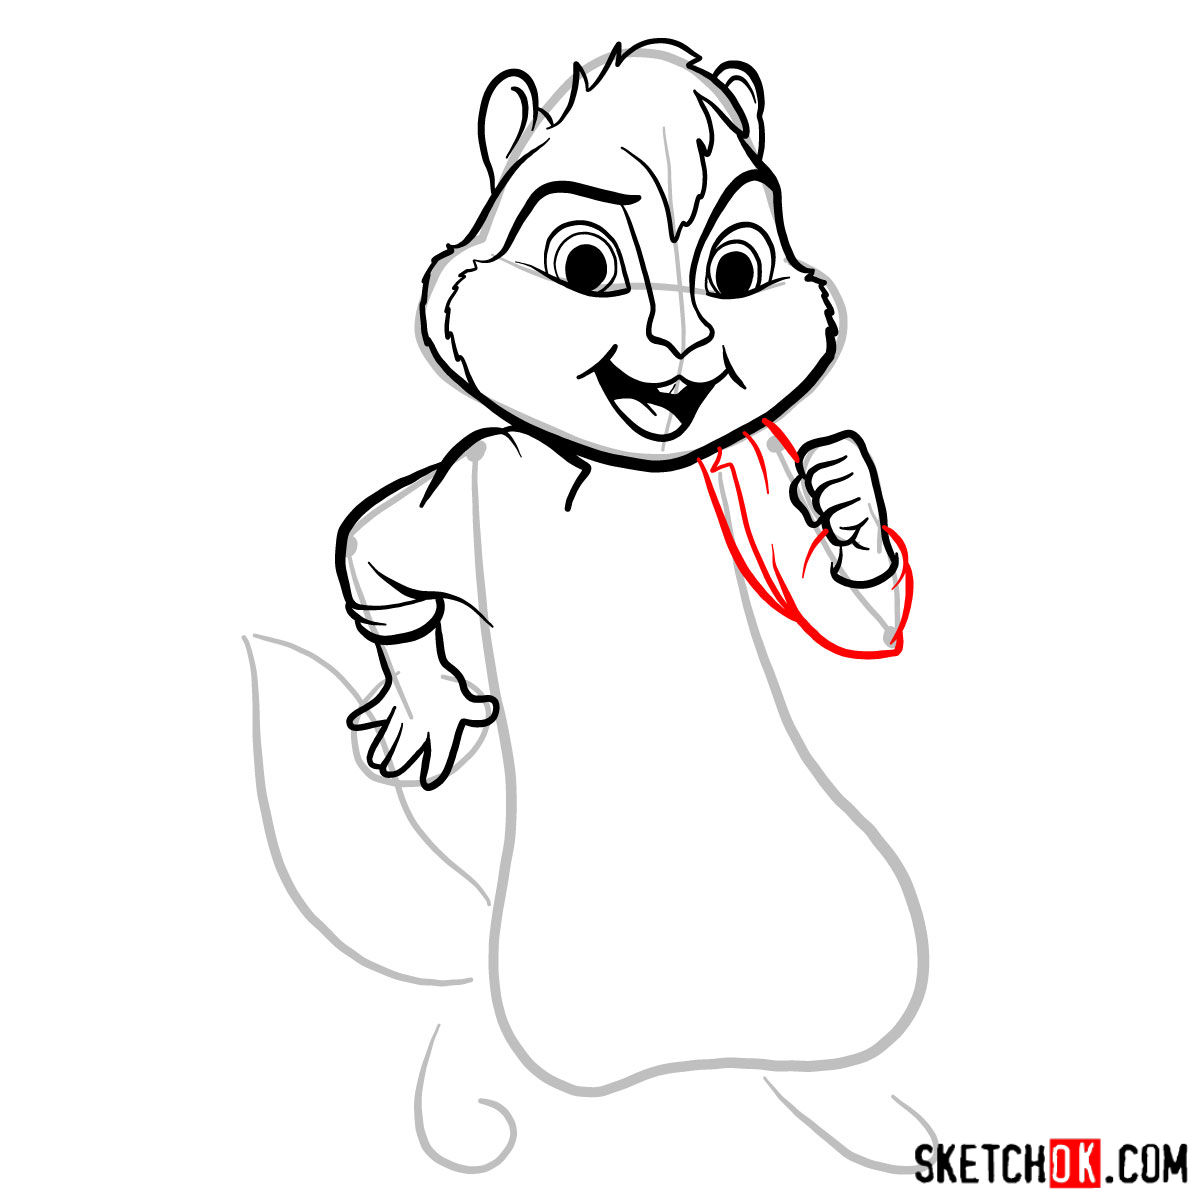 How to draw Alvin from Alvin and the Chipmunks - step 08